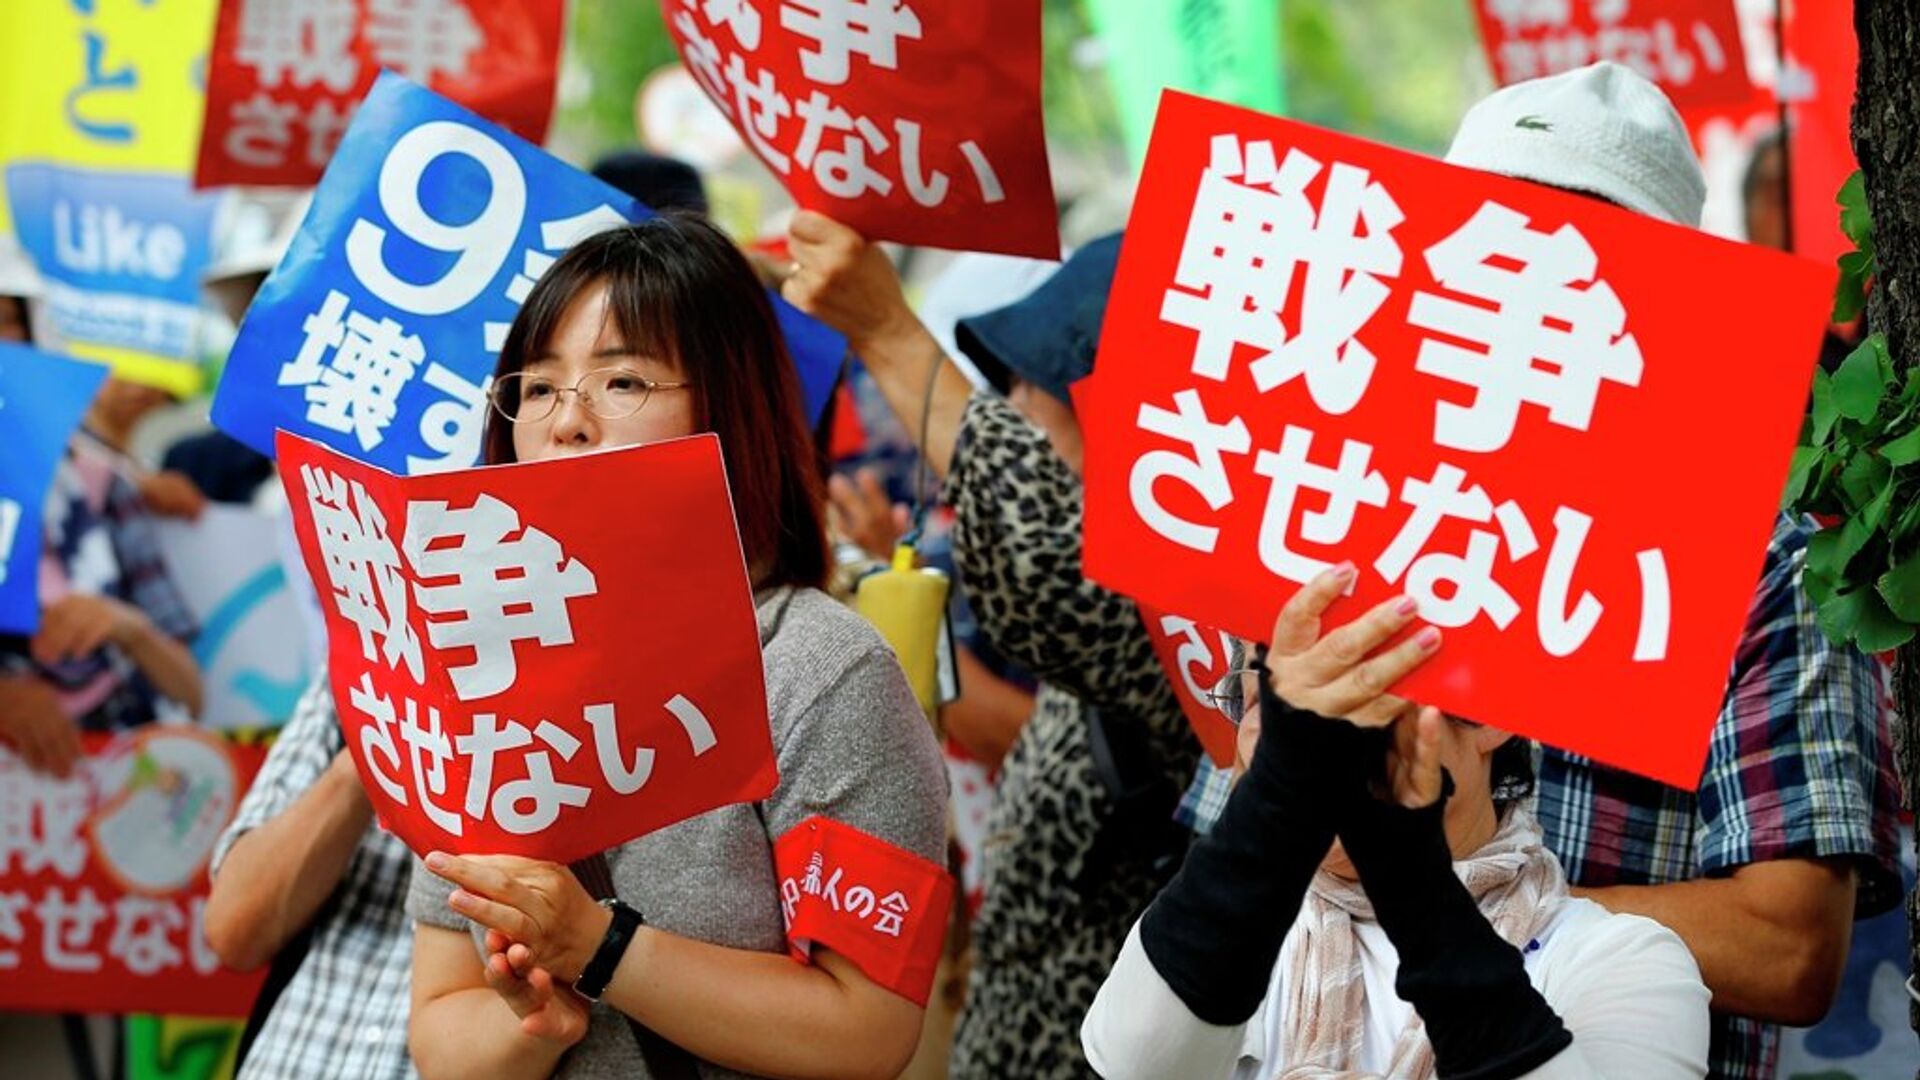 Protesters hold anti-war placards in front of the National Diet building during a rally in Tokyo - Sputnik International, 1920, 03.05.2022